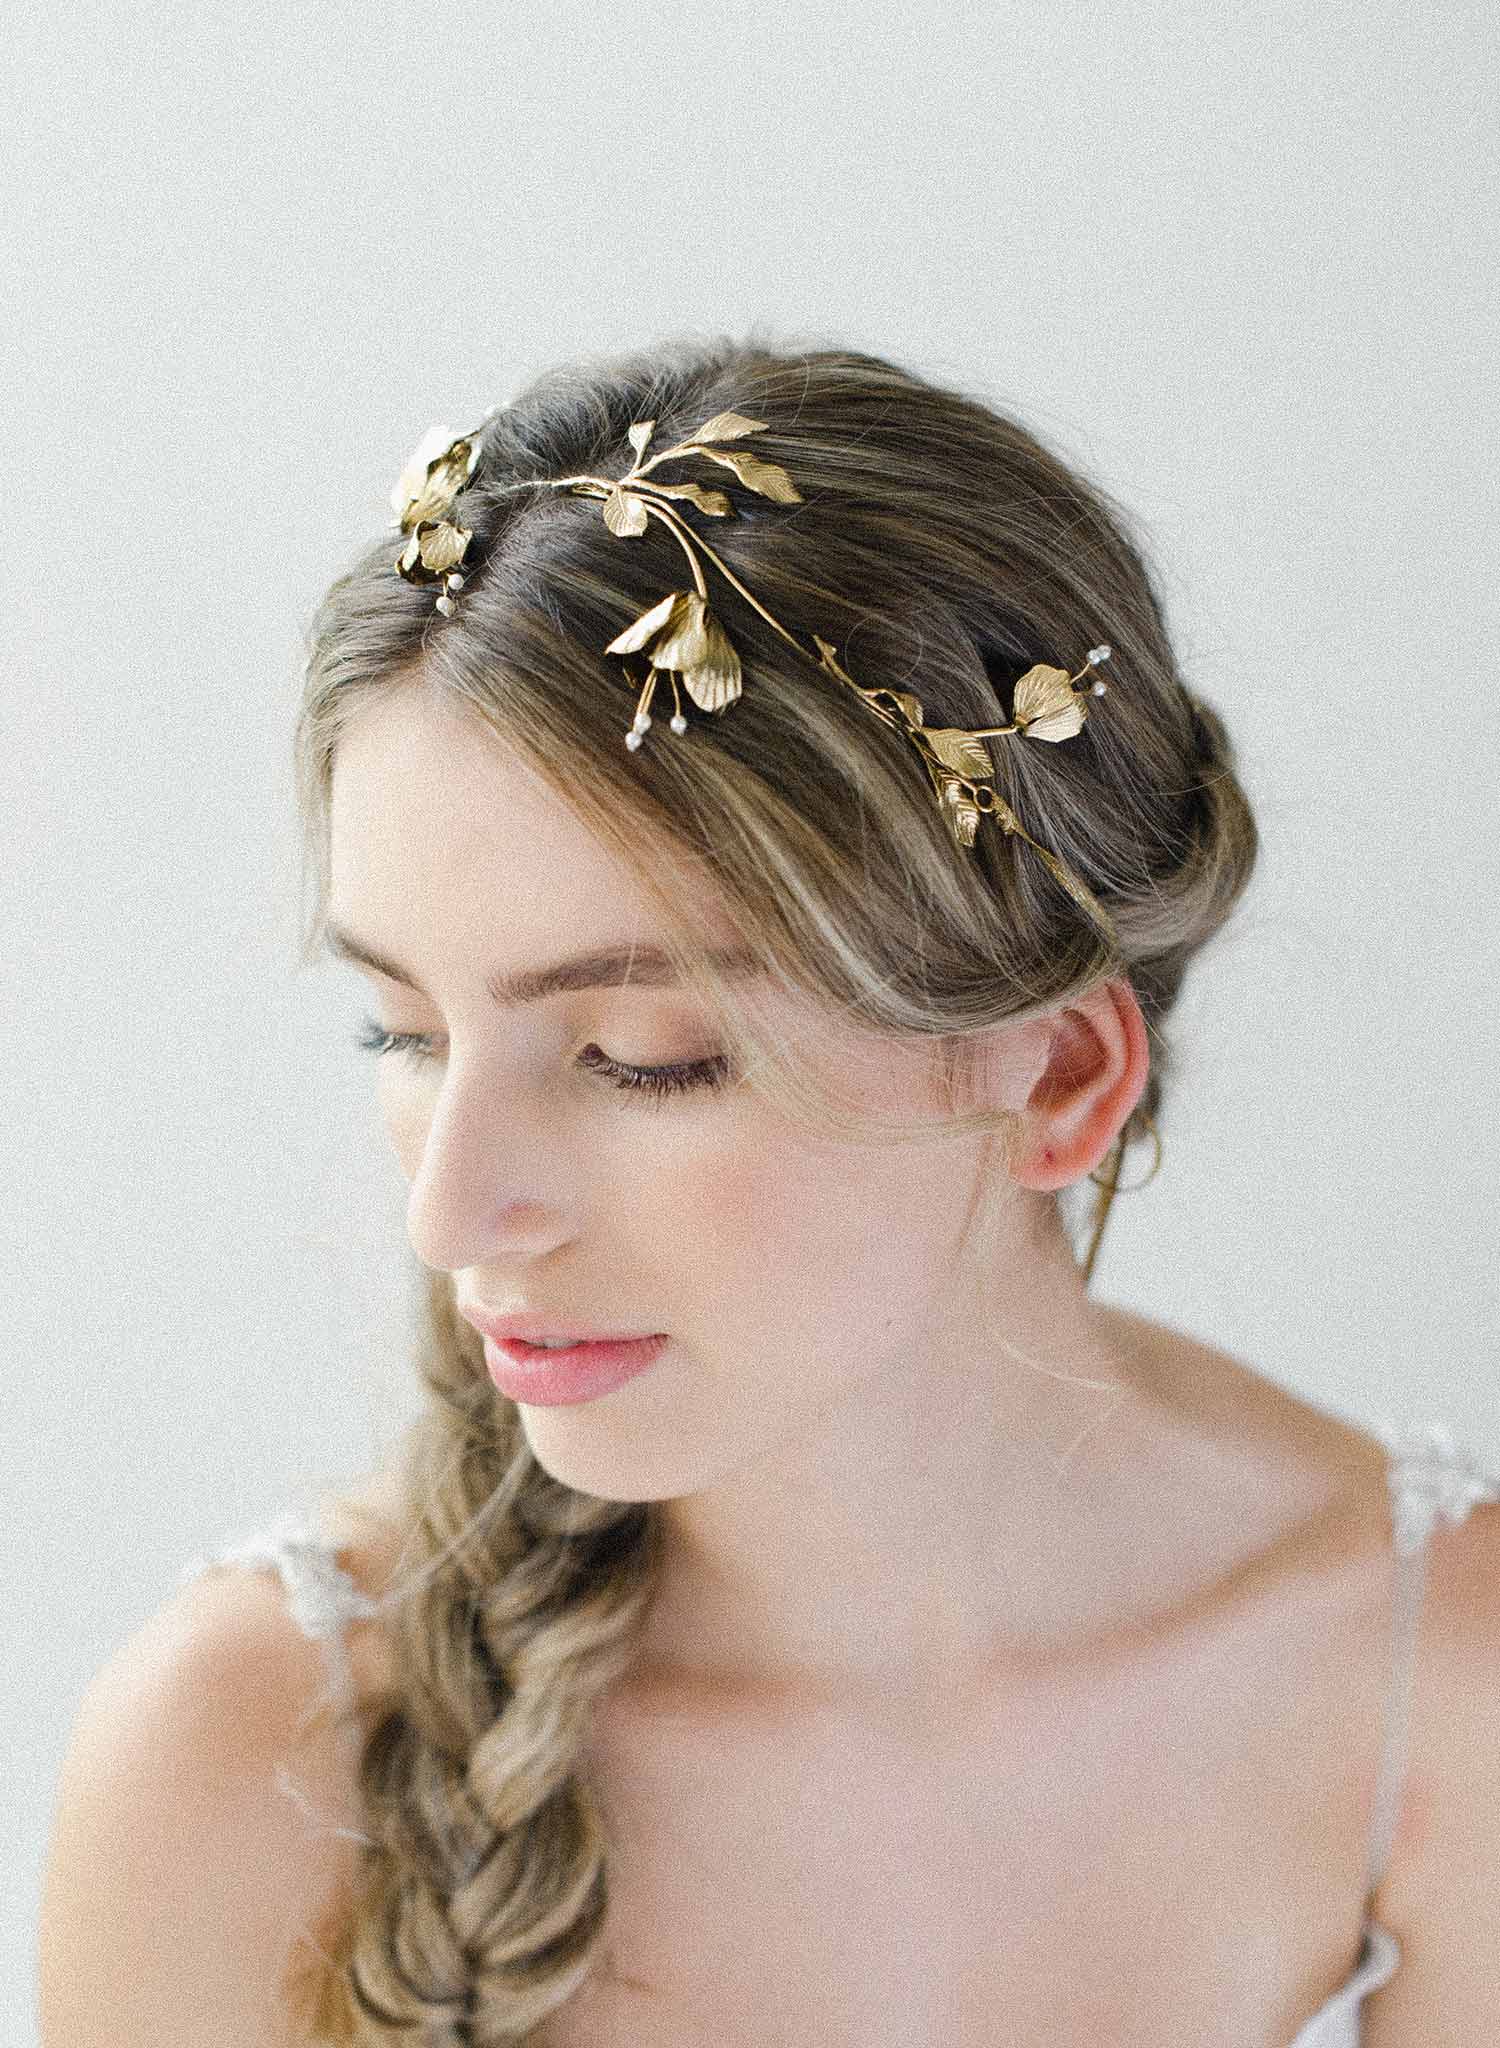 Winding bud and pearl branch headpiece - Style #2037